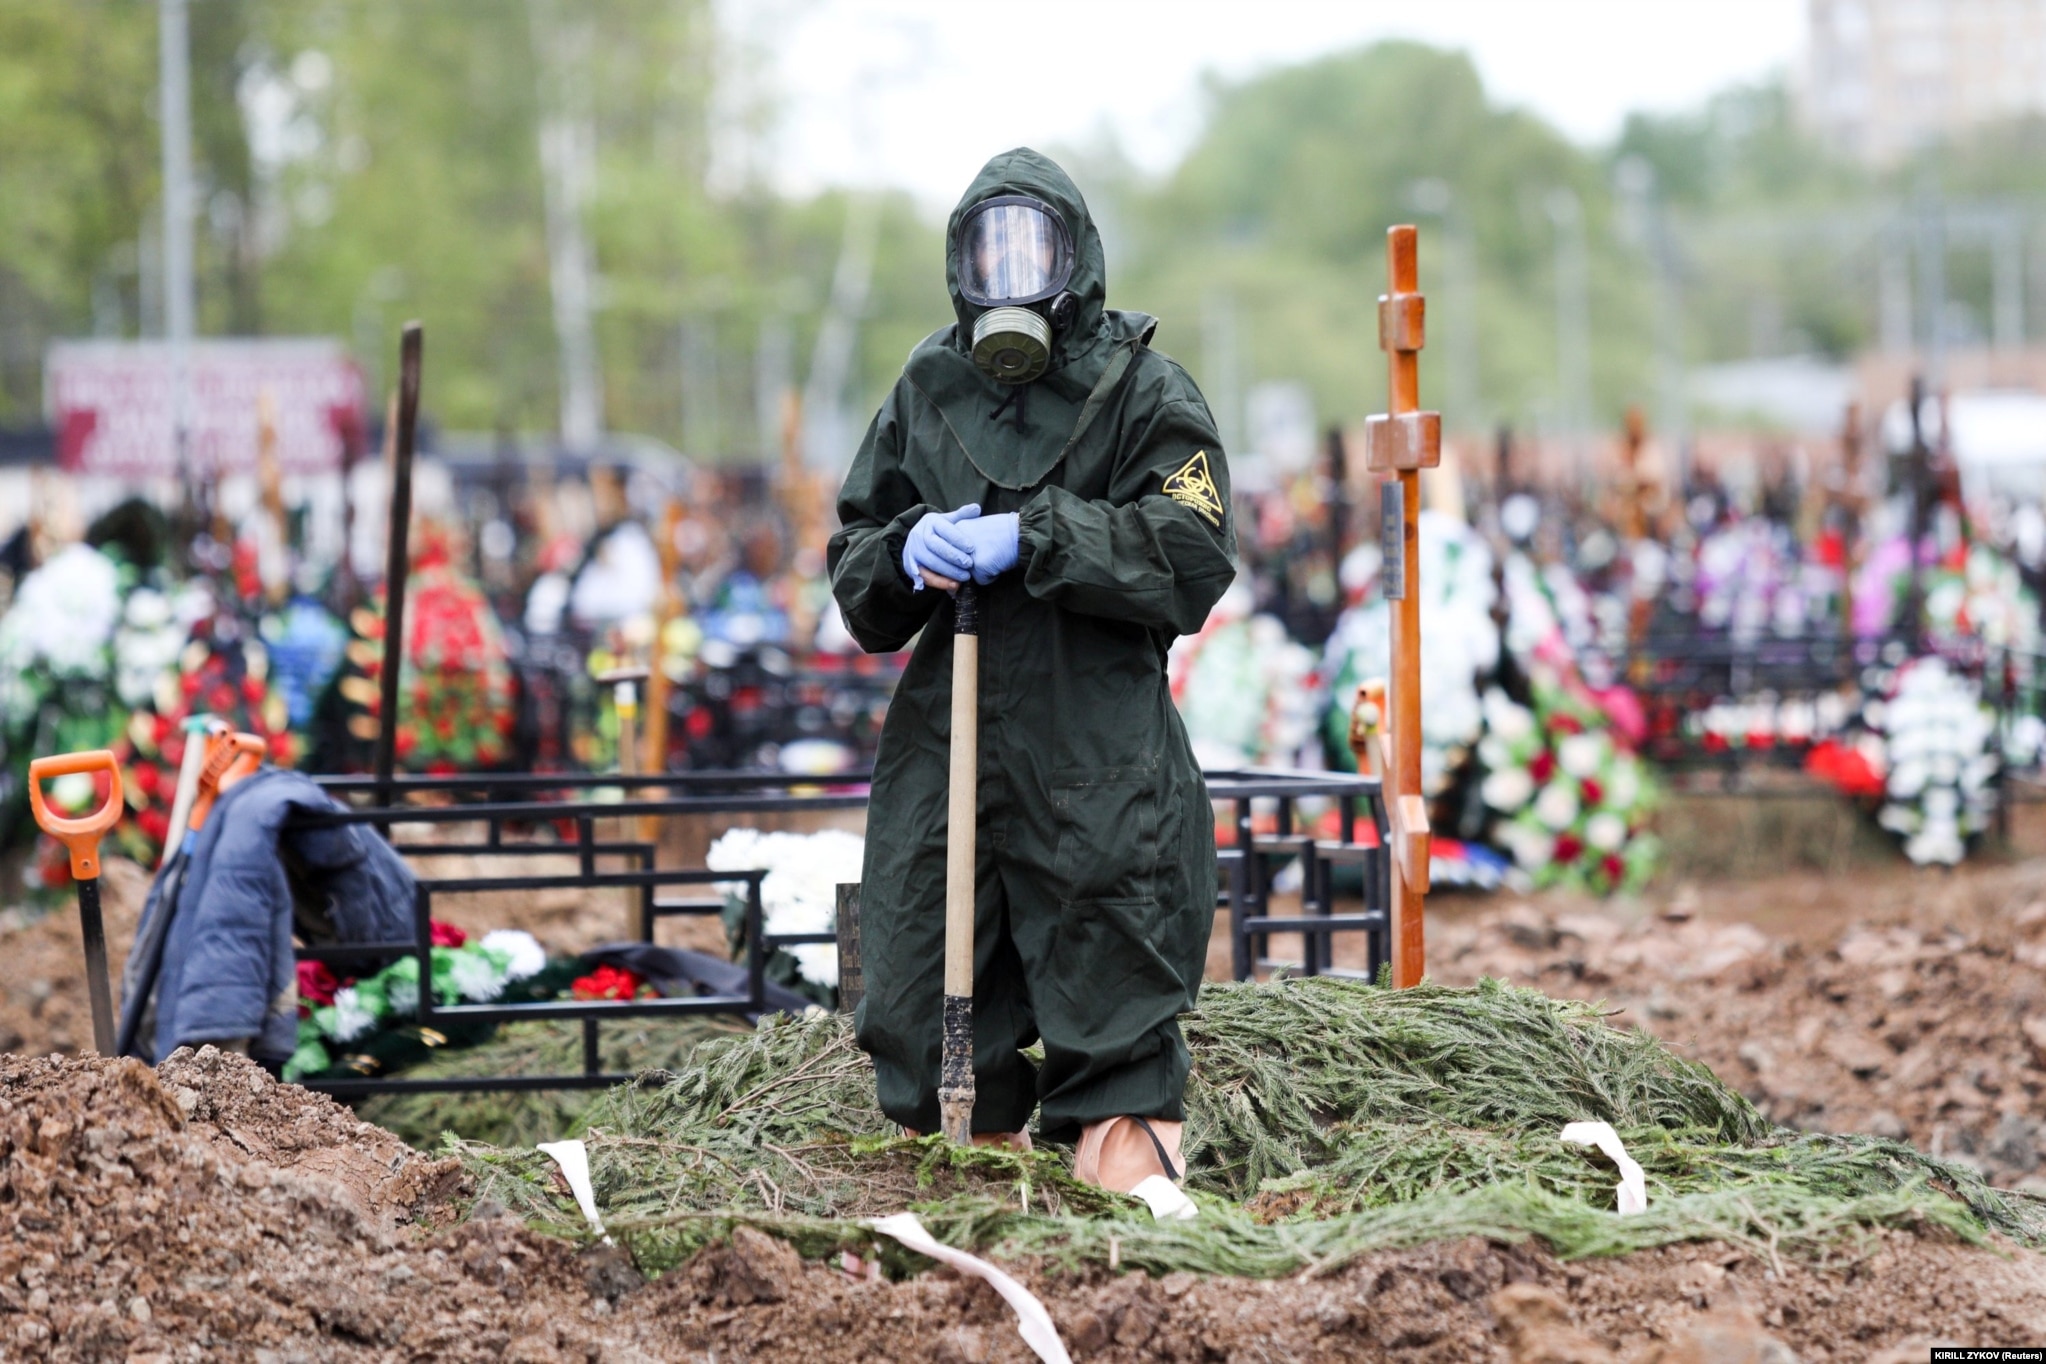 A gravedigger wearing a protective suit stands by a grave during the burial of a COVID-19 victim on the outskirts of Moscow on May 15.